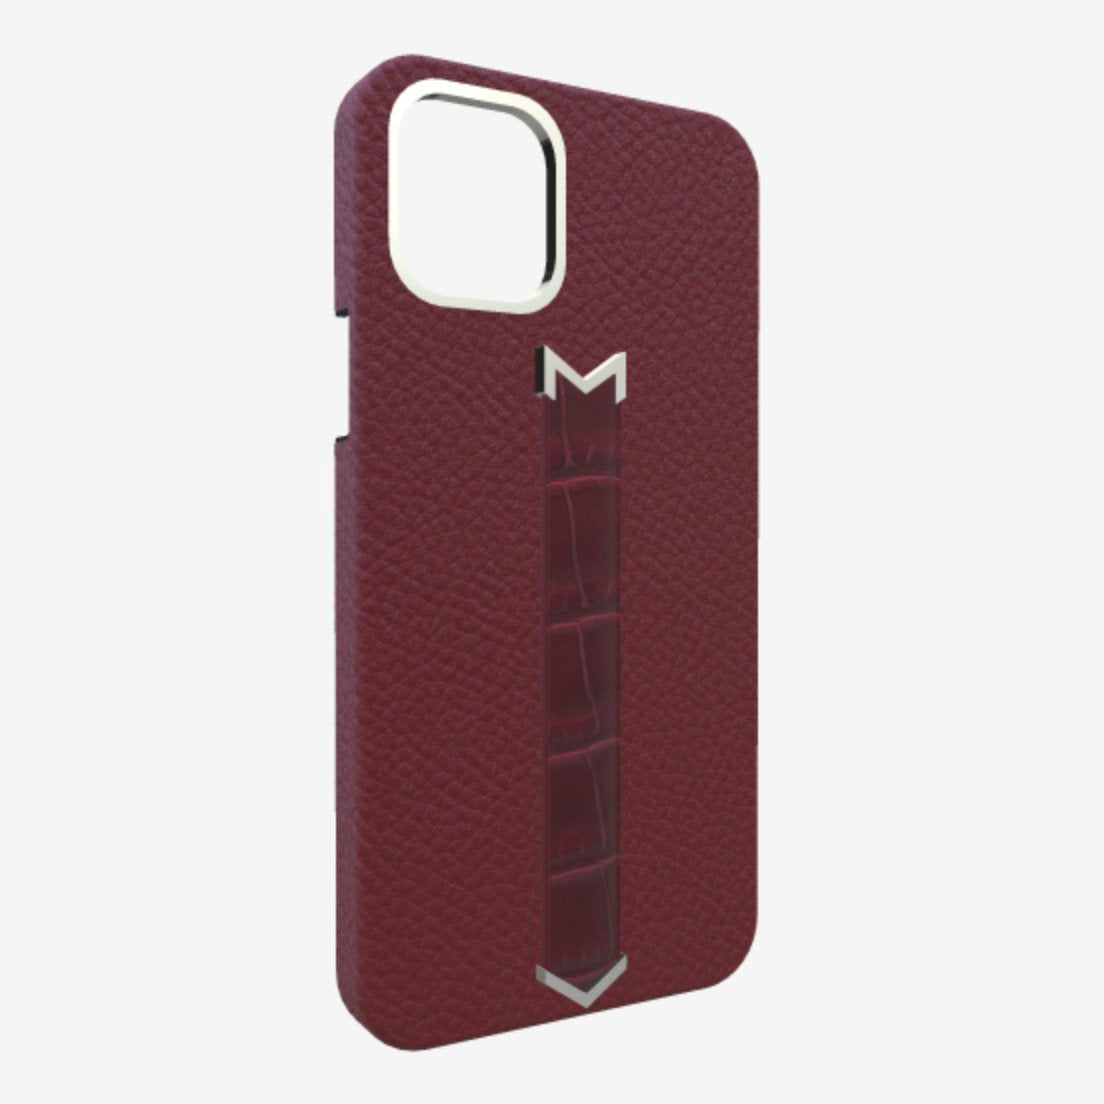 Silver Finger Strap Case for iPhone 13 in Genuine Calfskin and Alligator Burgundy-Palace Burgundy-Palace 